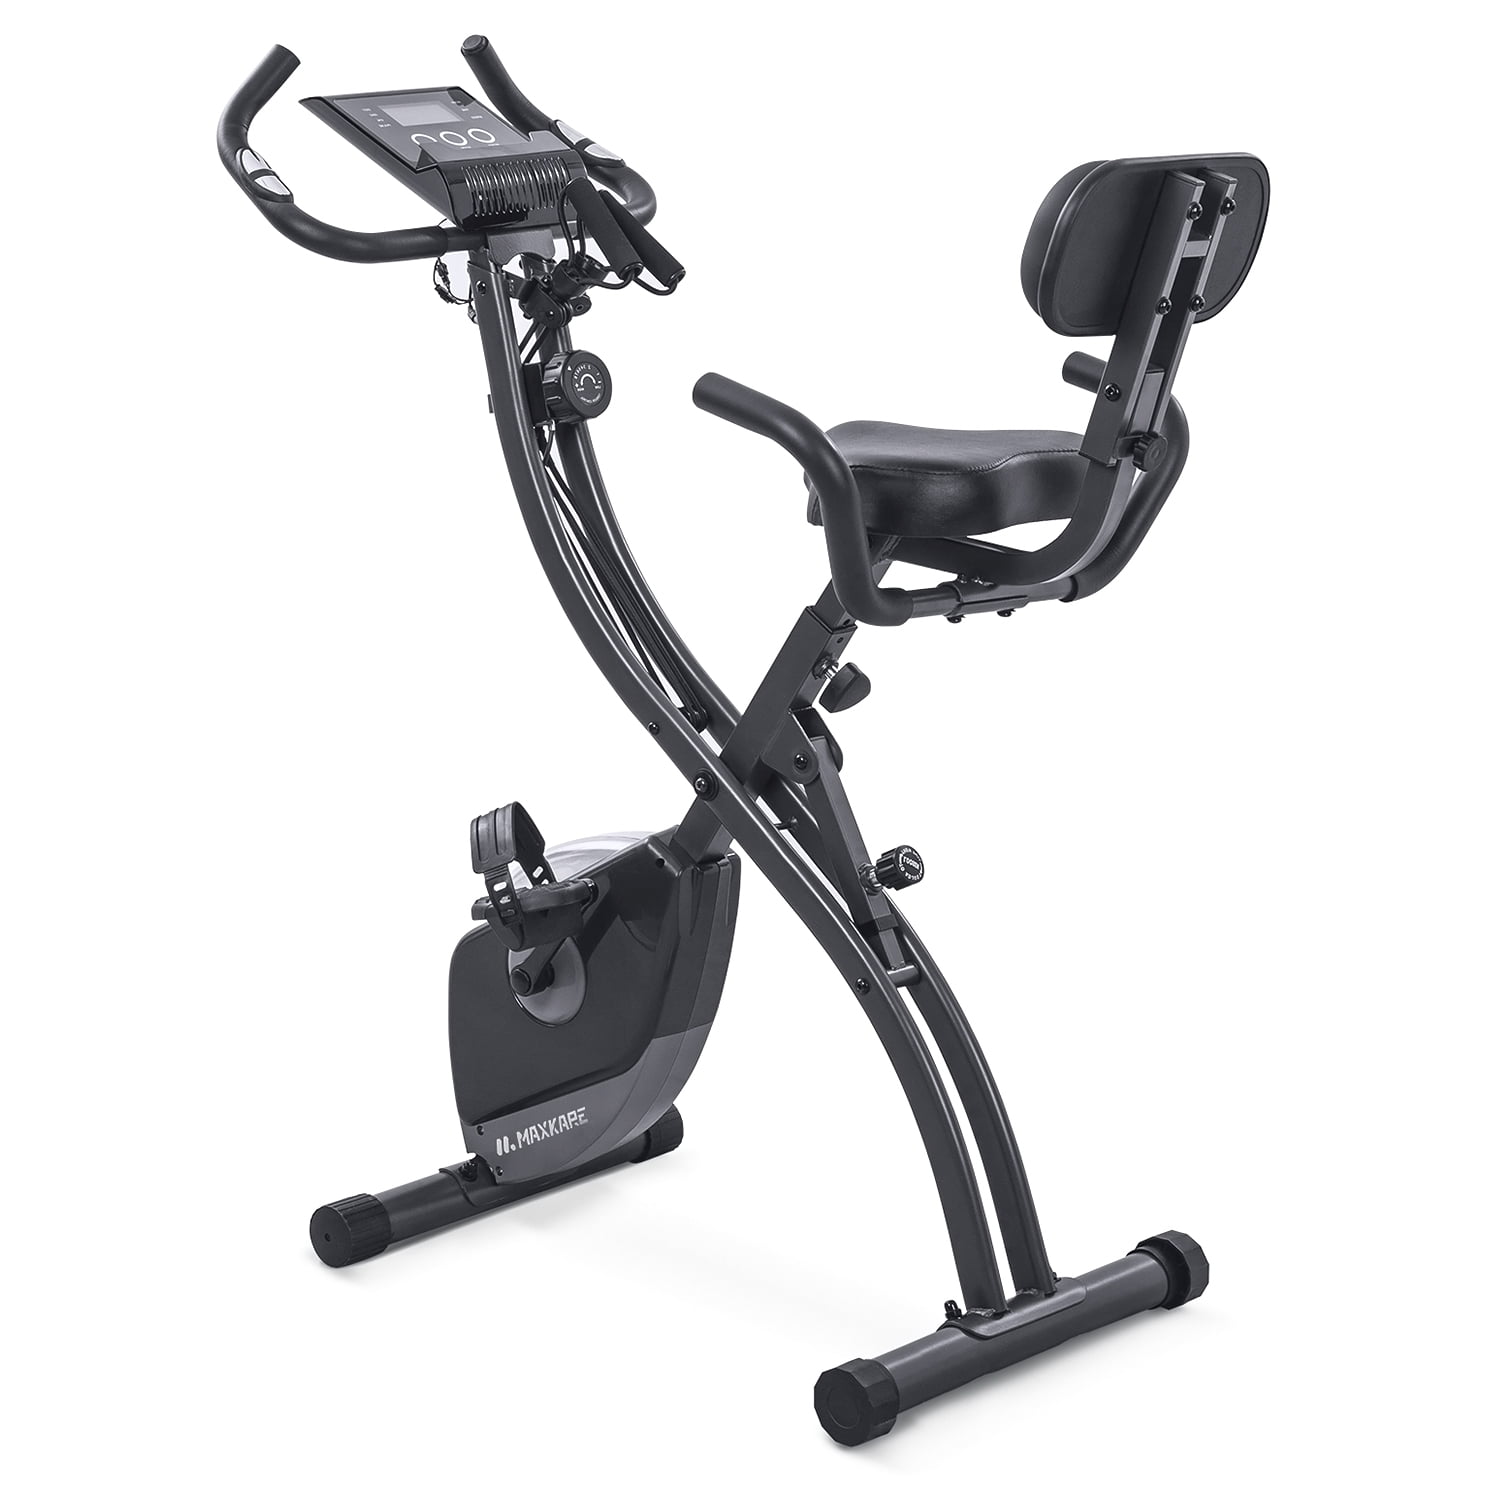 Details about   Recumbent Exercise Bike Cardio Training Bicycle with Magnetic Resistance NEW 